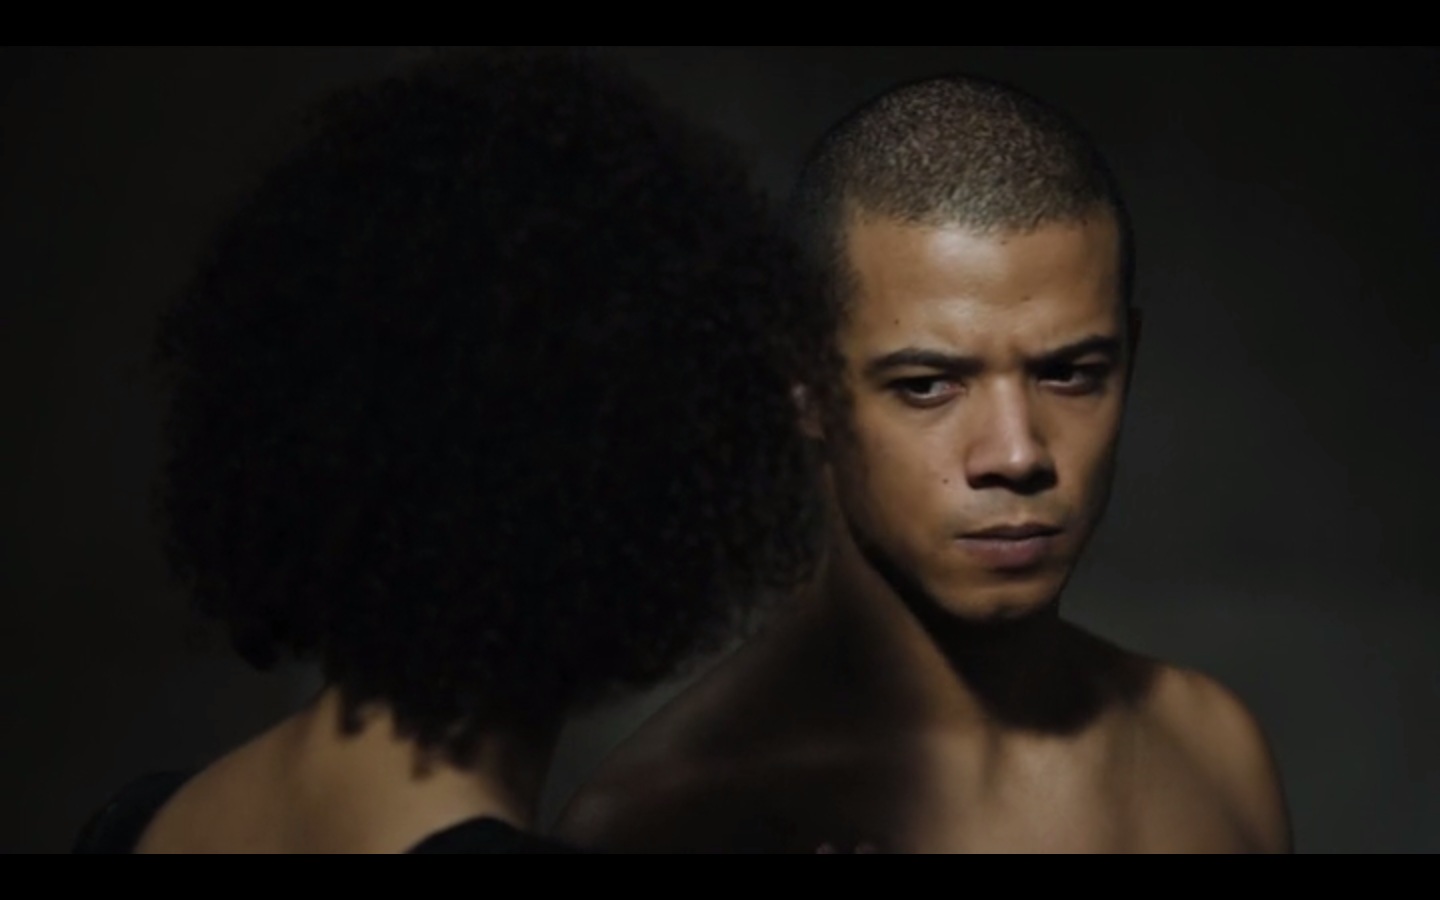 Game of Thrones 5x10 - Jacob Anderson & Naked Extra.